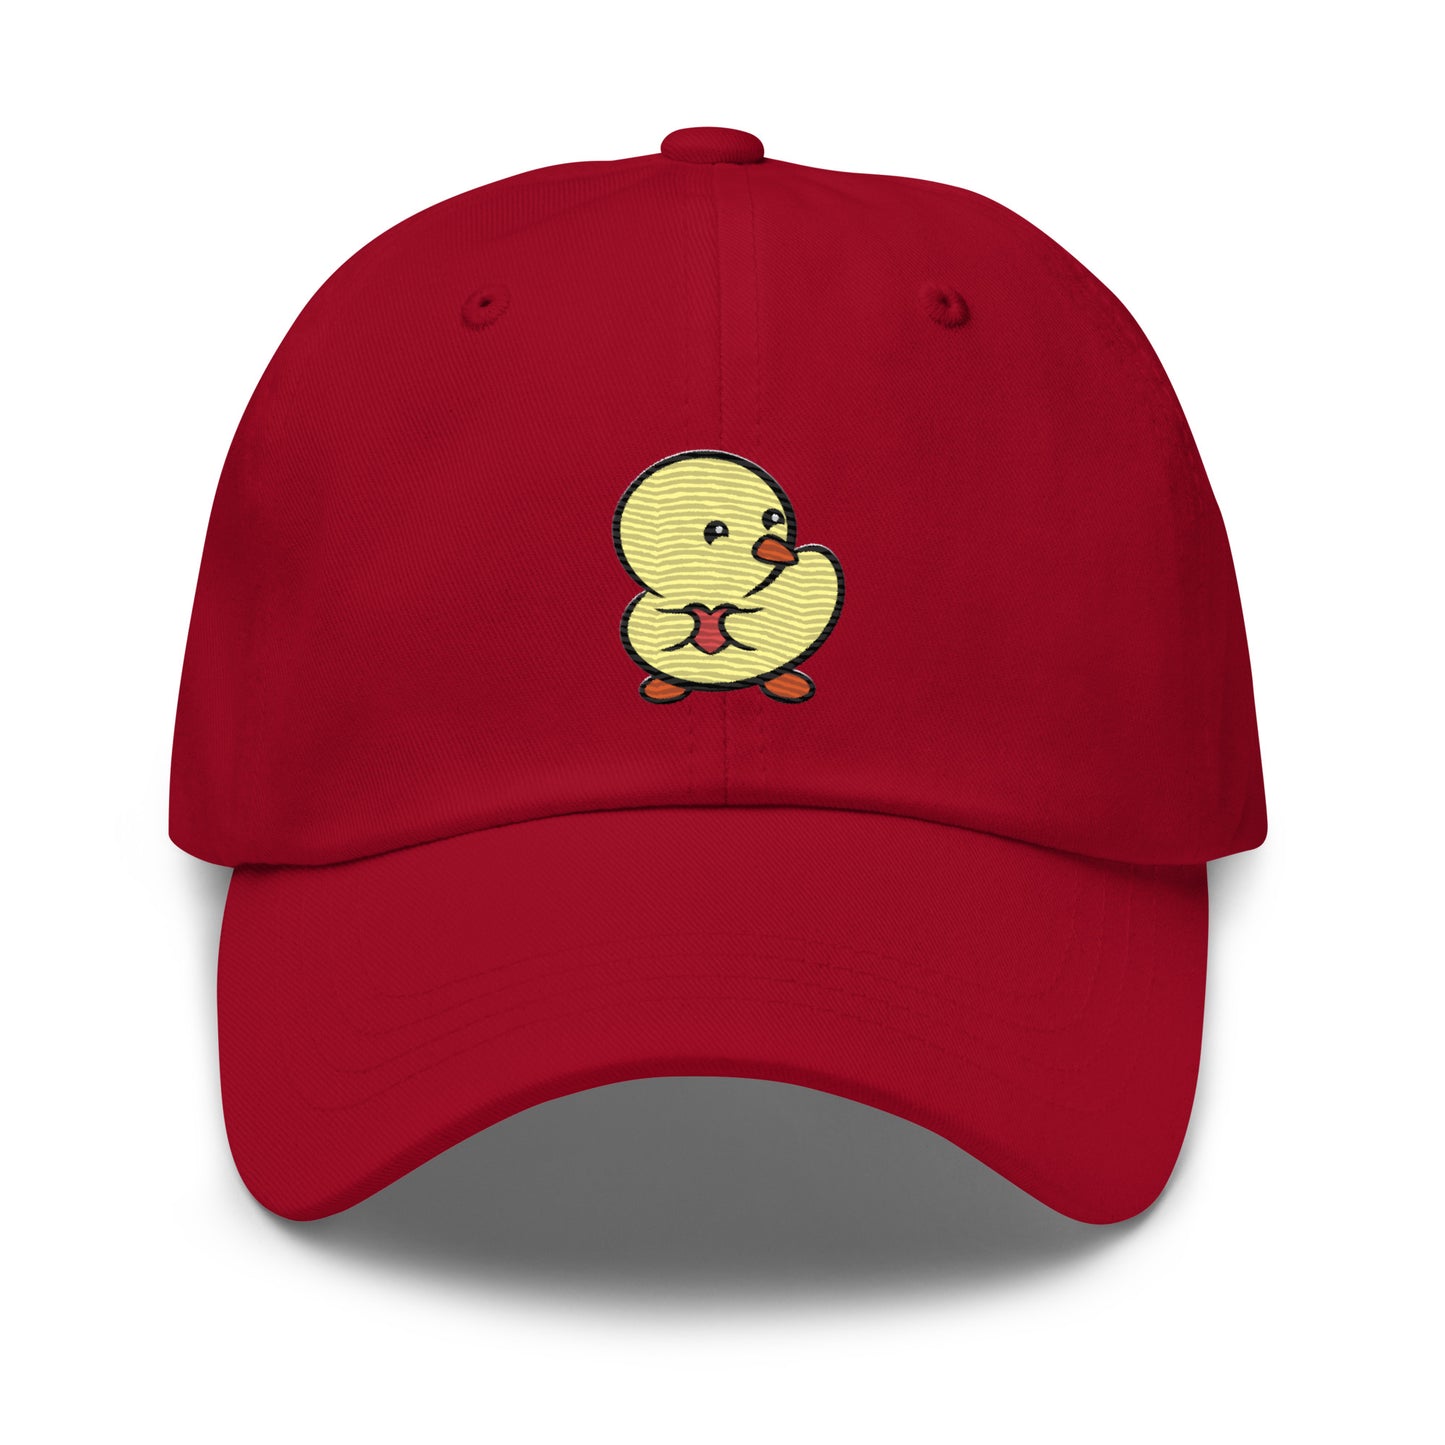 Duckie stole your heart - Cap